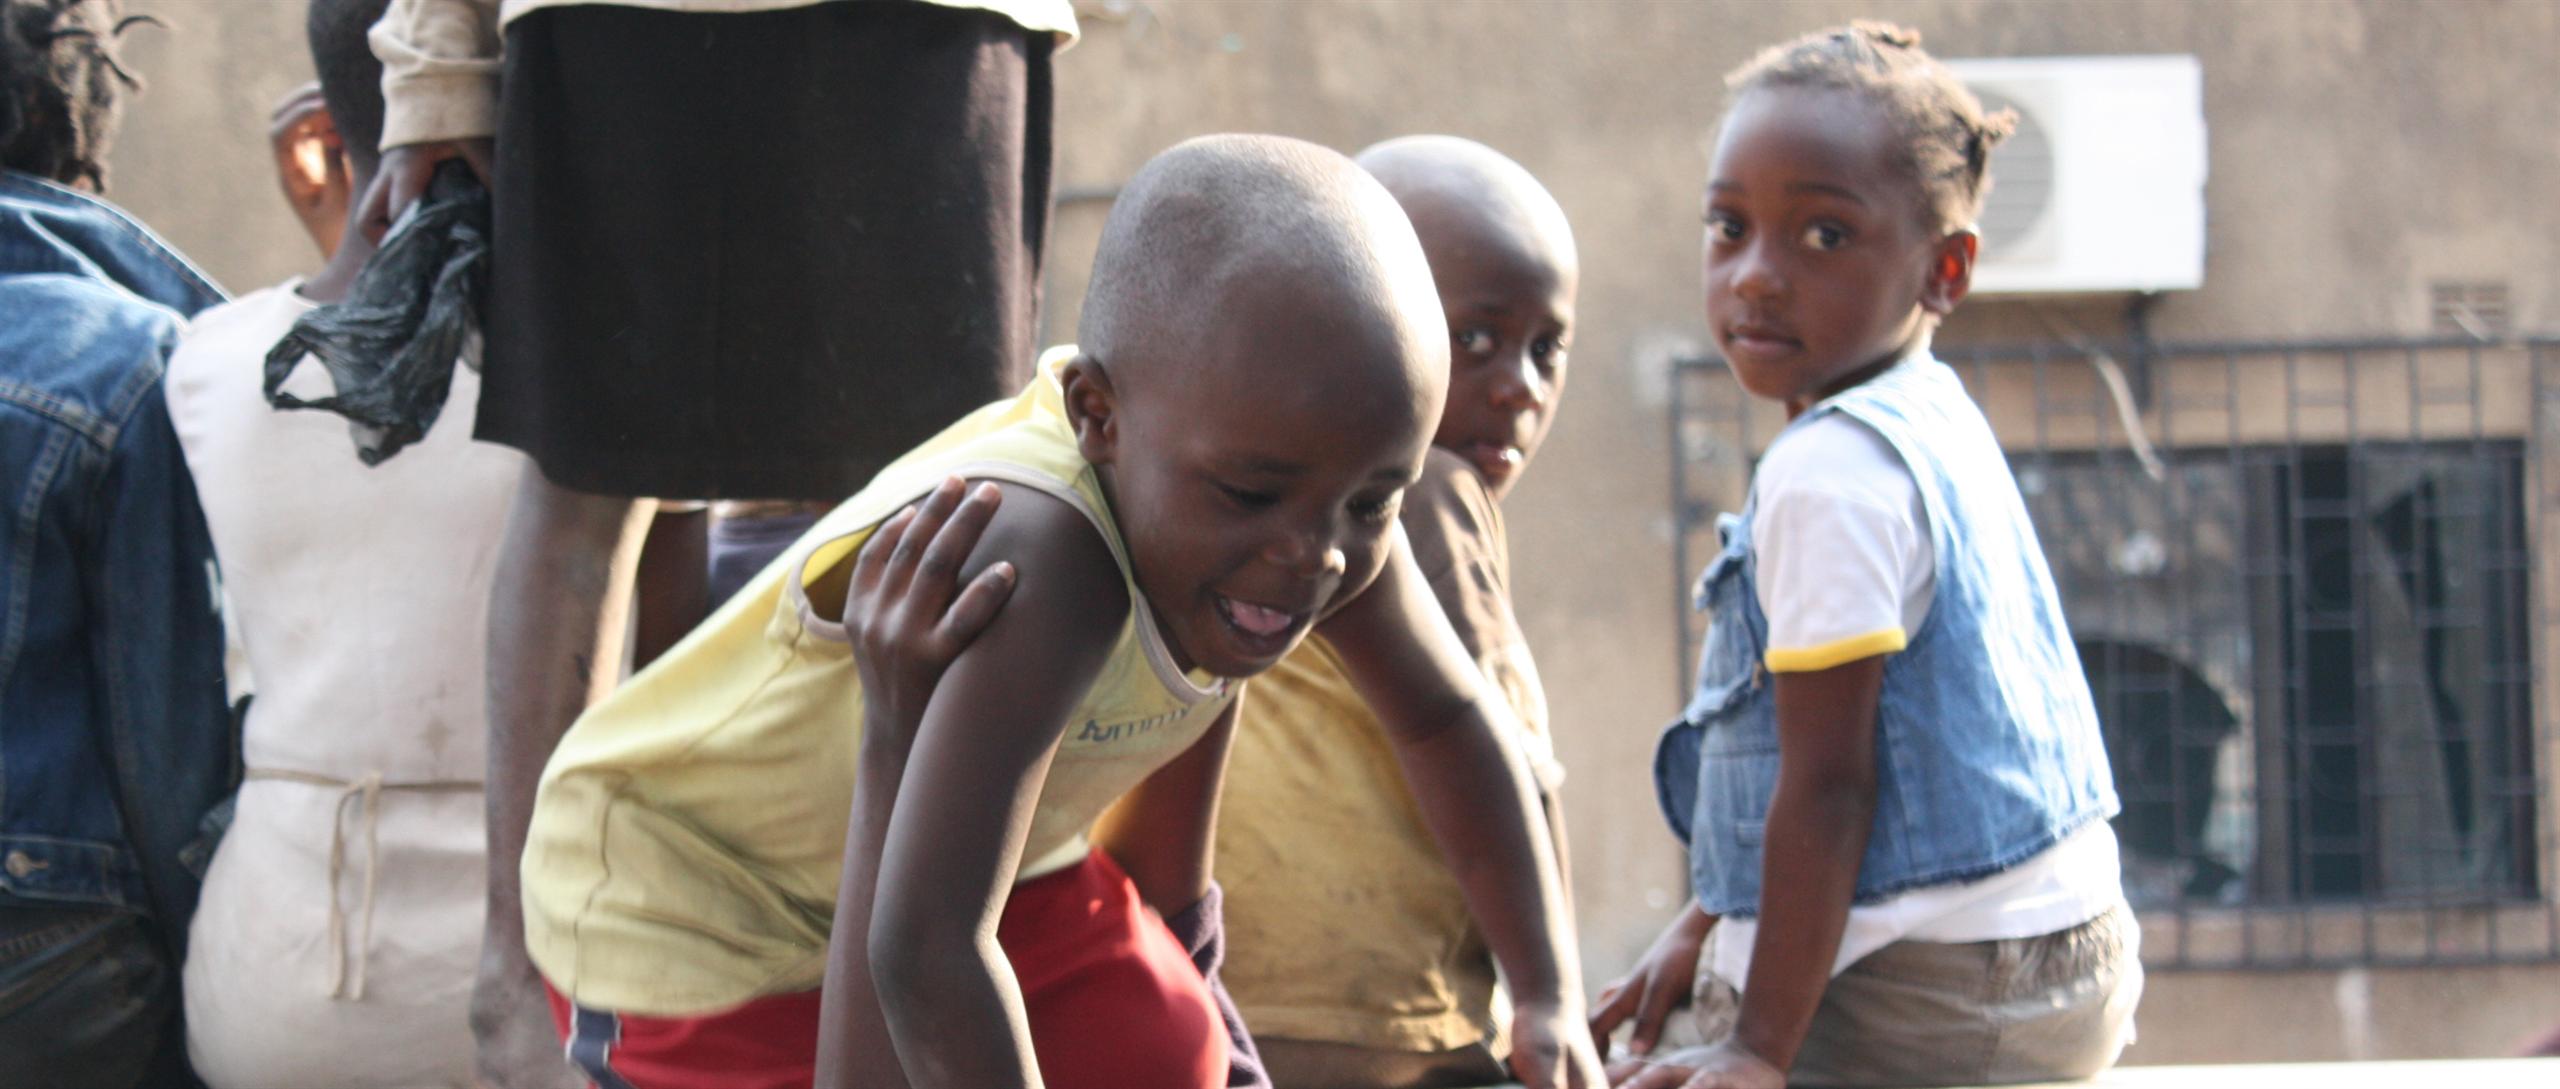 Young children in Zambia